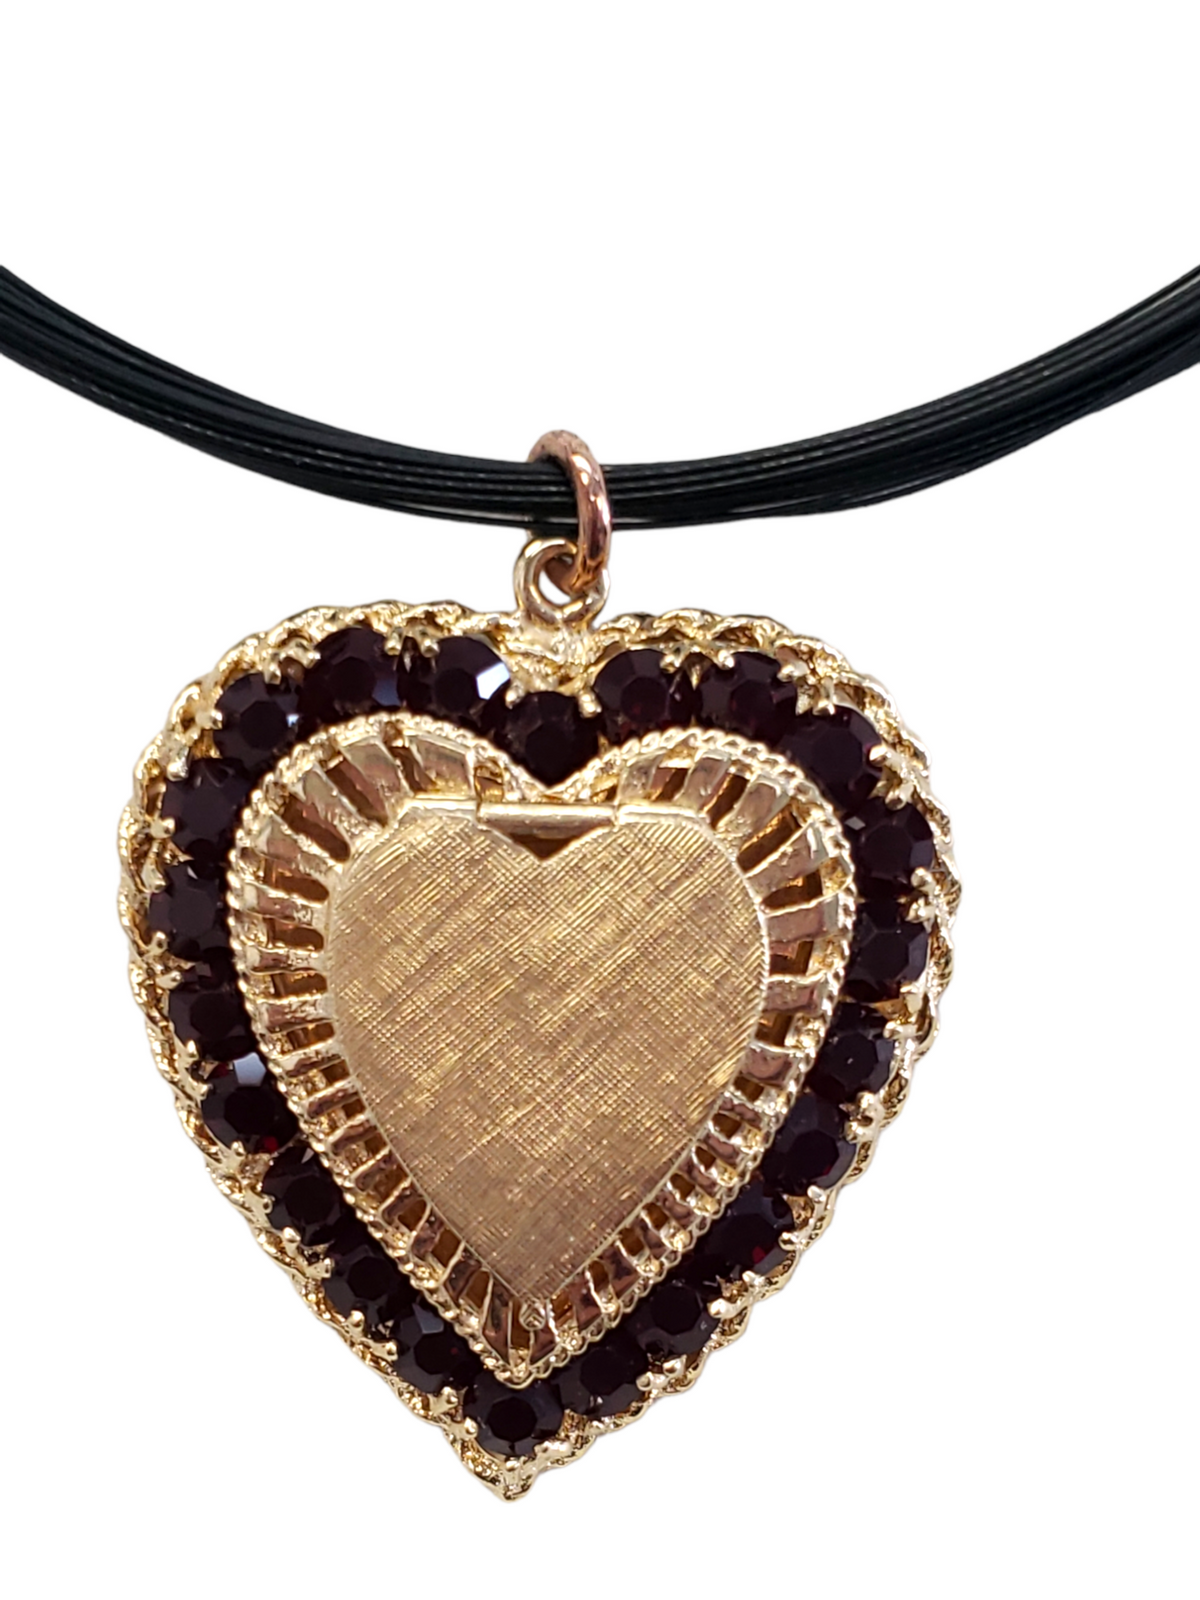 Heart Locket Necklace with Garnet Stones, 14k Yellow Gold